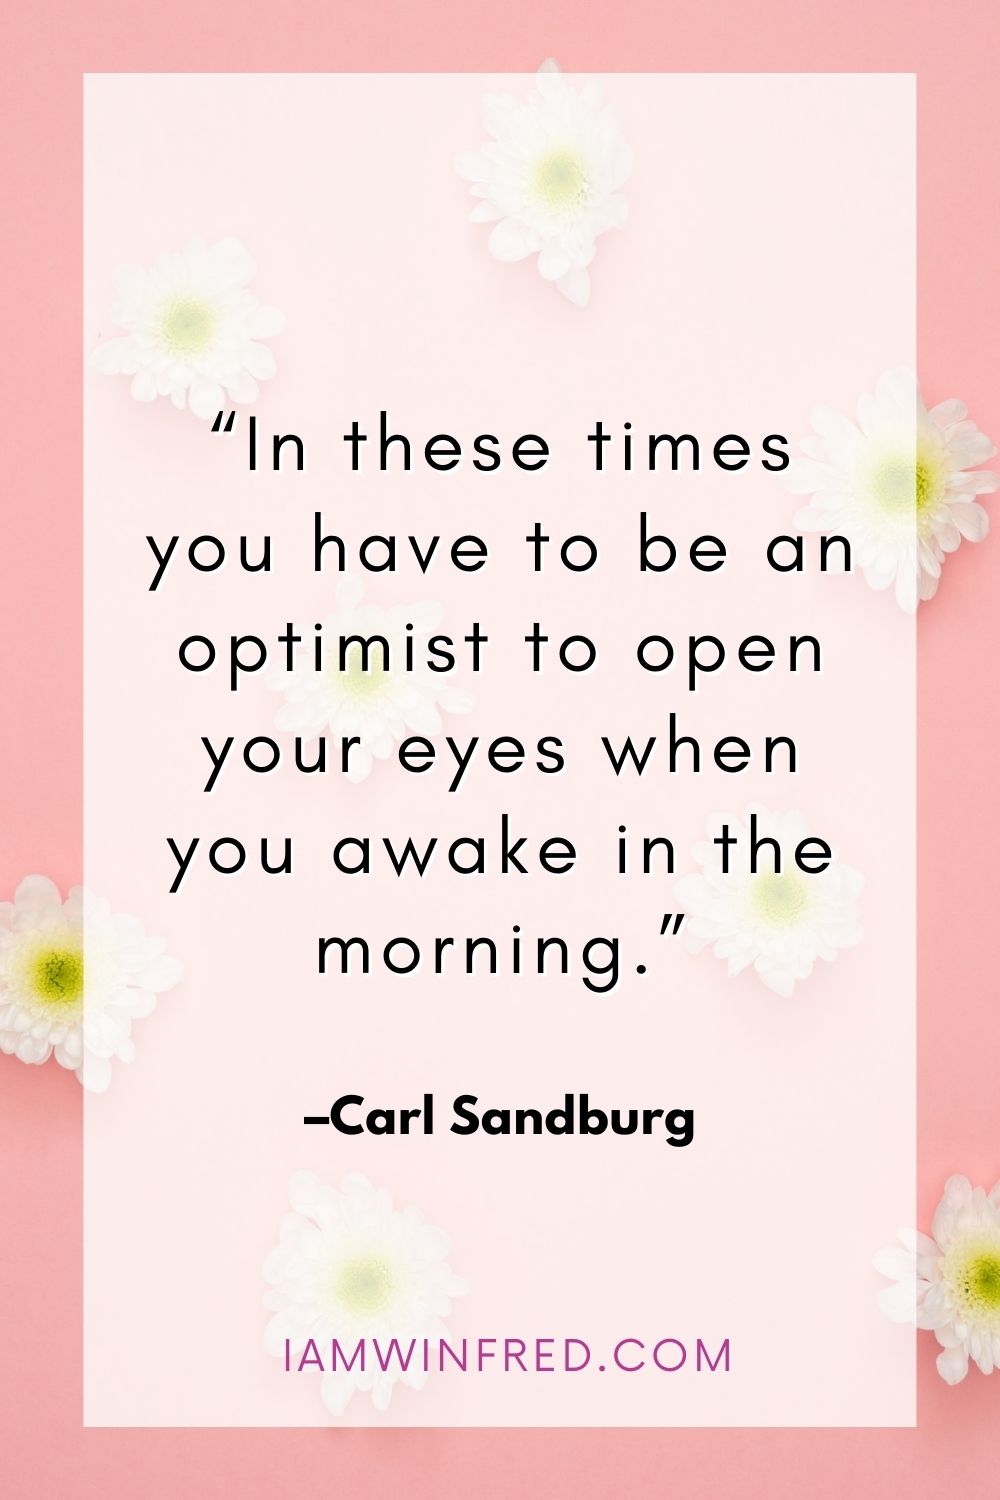 In These Times You Have To Be An Optimist To Open Your Eyes When You Awake In The Morning.